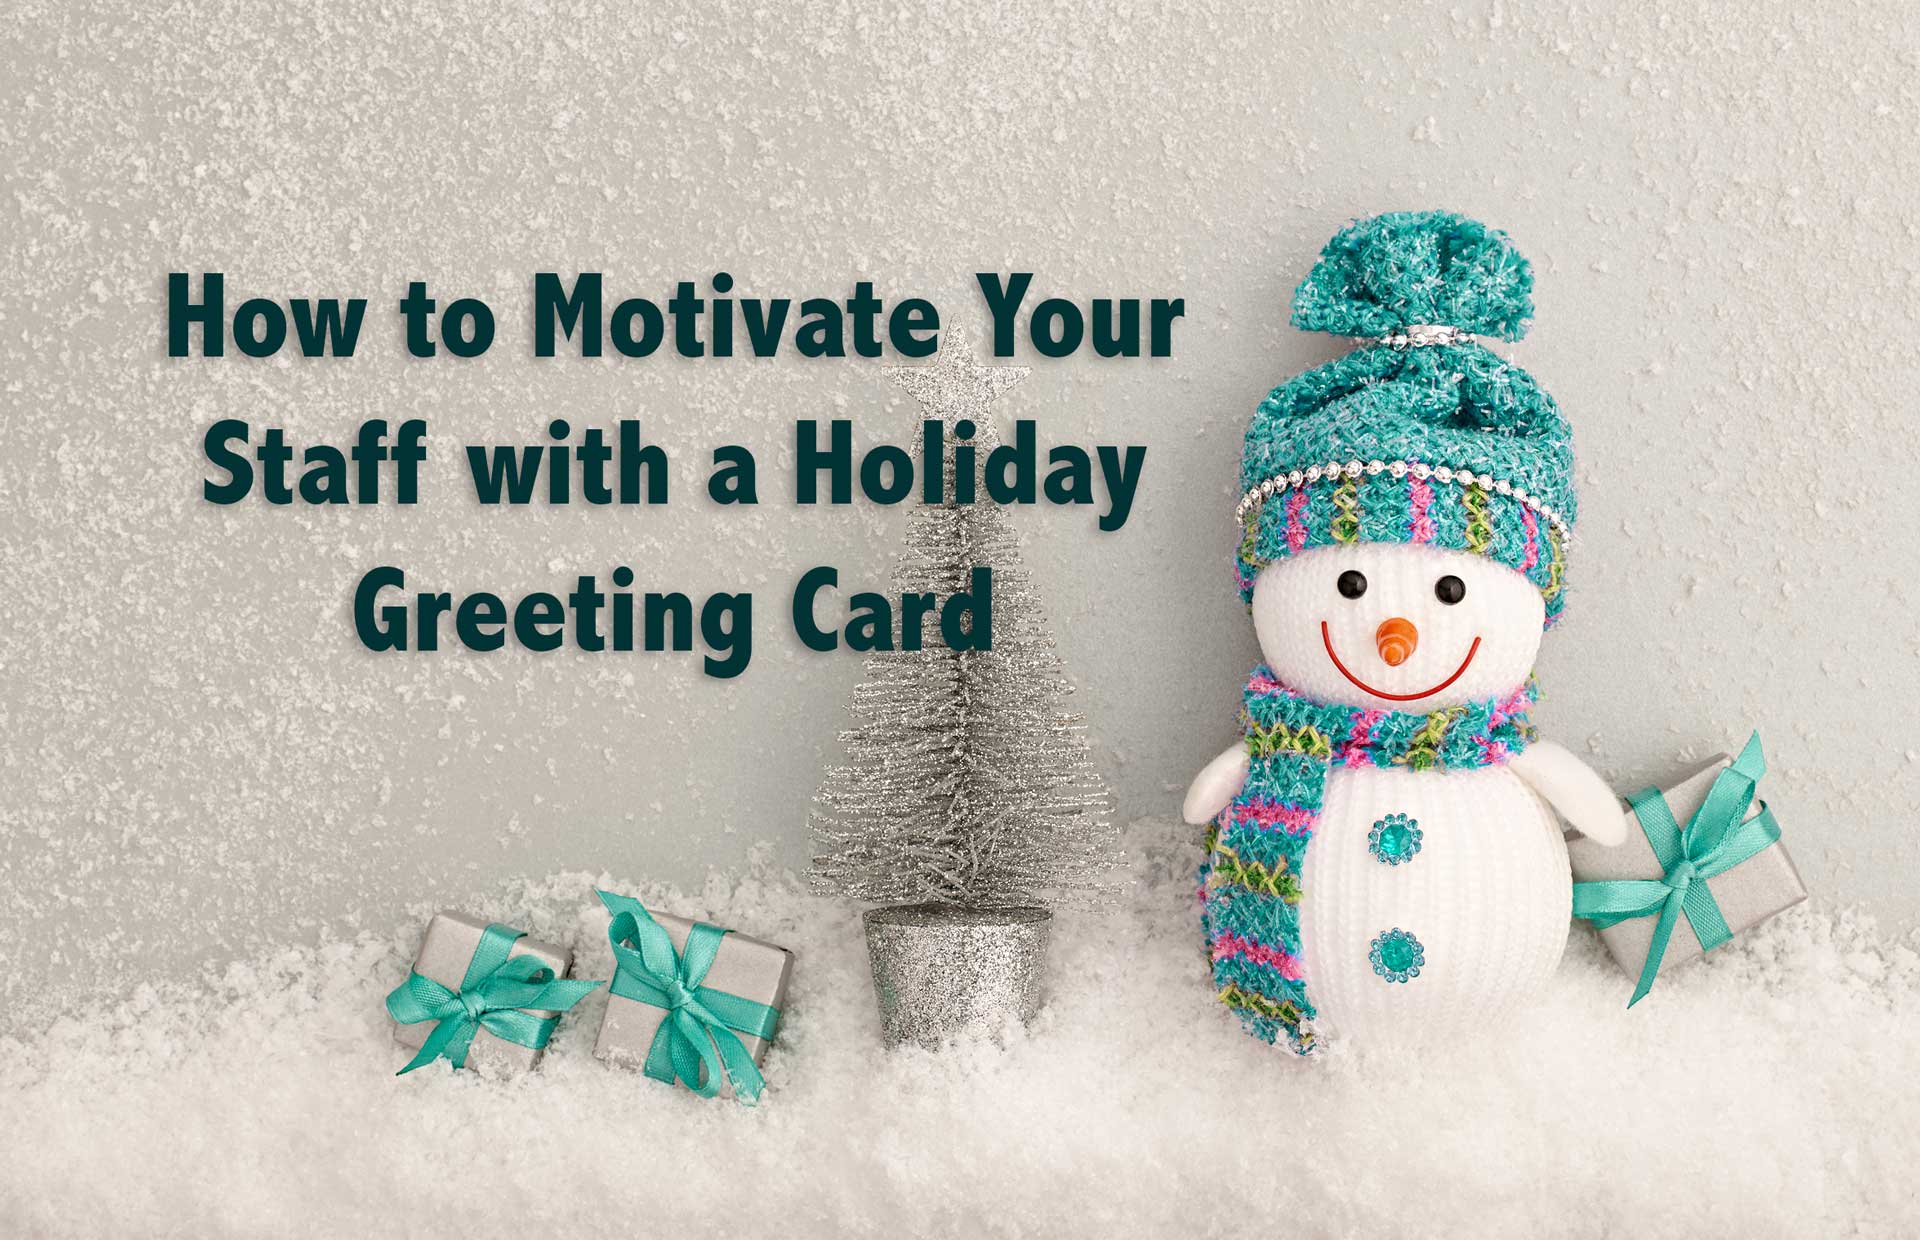 holiday wishes for employees